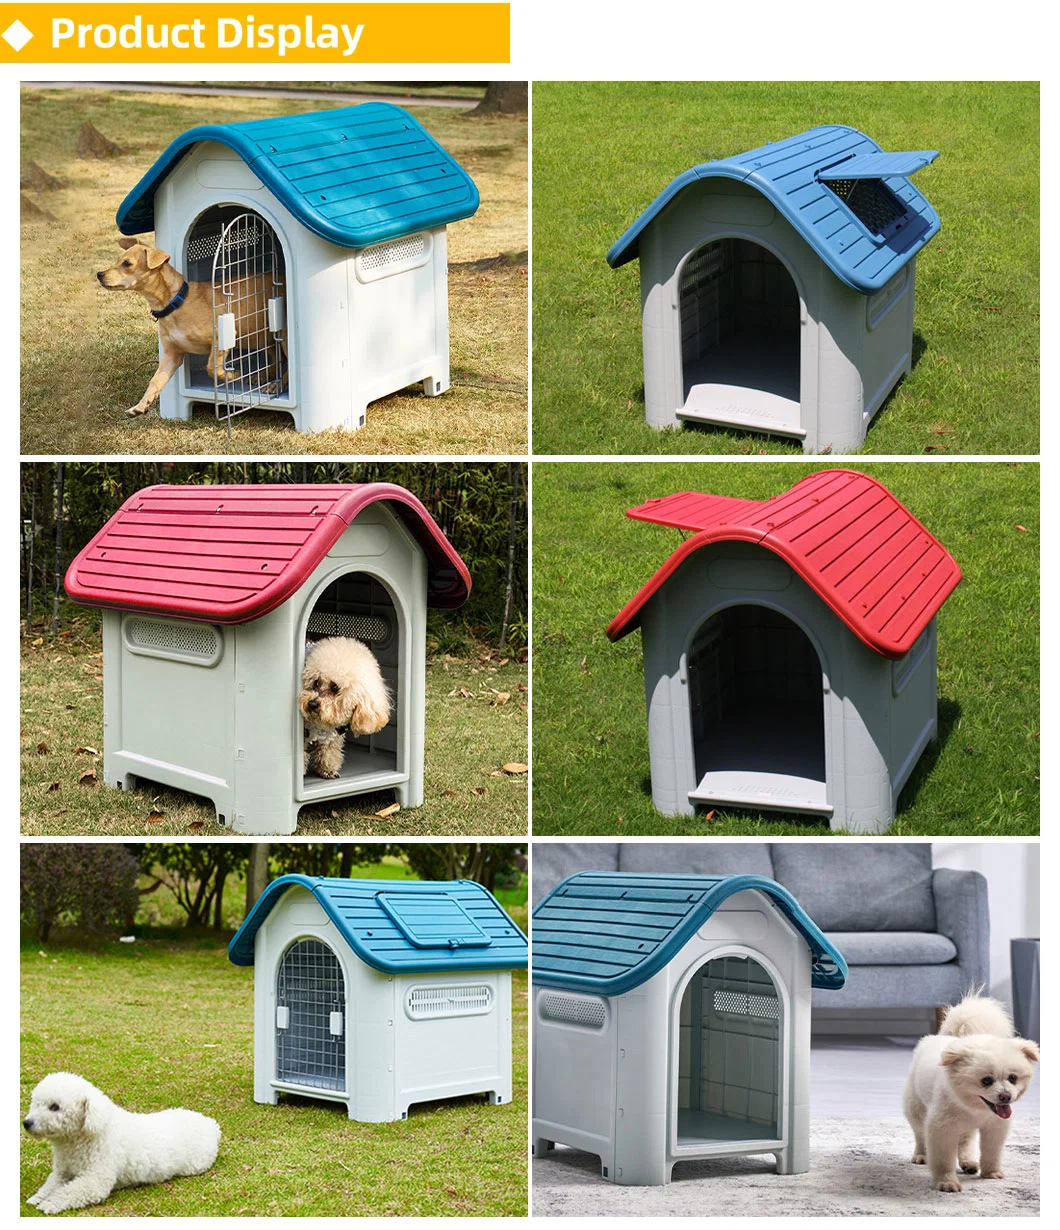 Custom Weatherproof Comfortable All-Season Availability PP Material Plastic Big Pet Kennel Cat Crate Shelter Eco-Friendly Waterproof and Sunscreen Dog Pet House